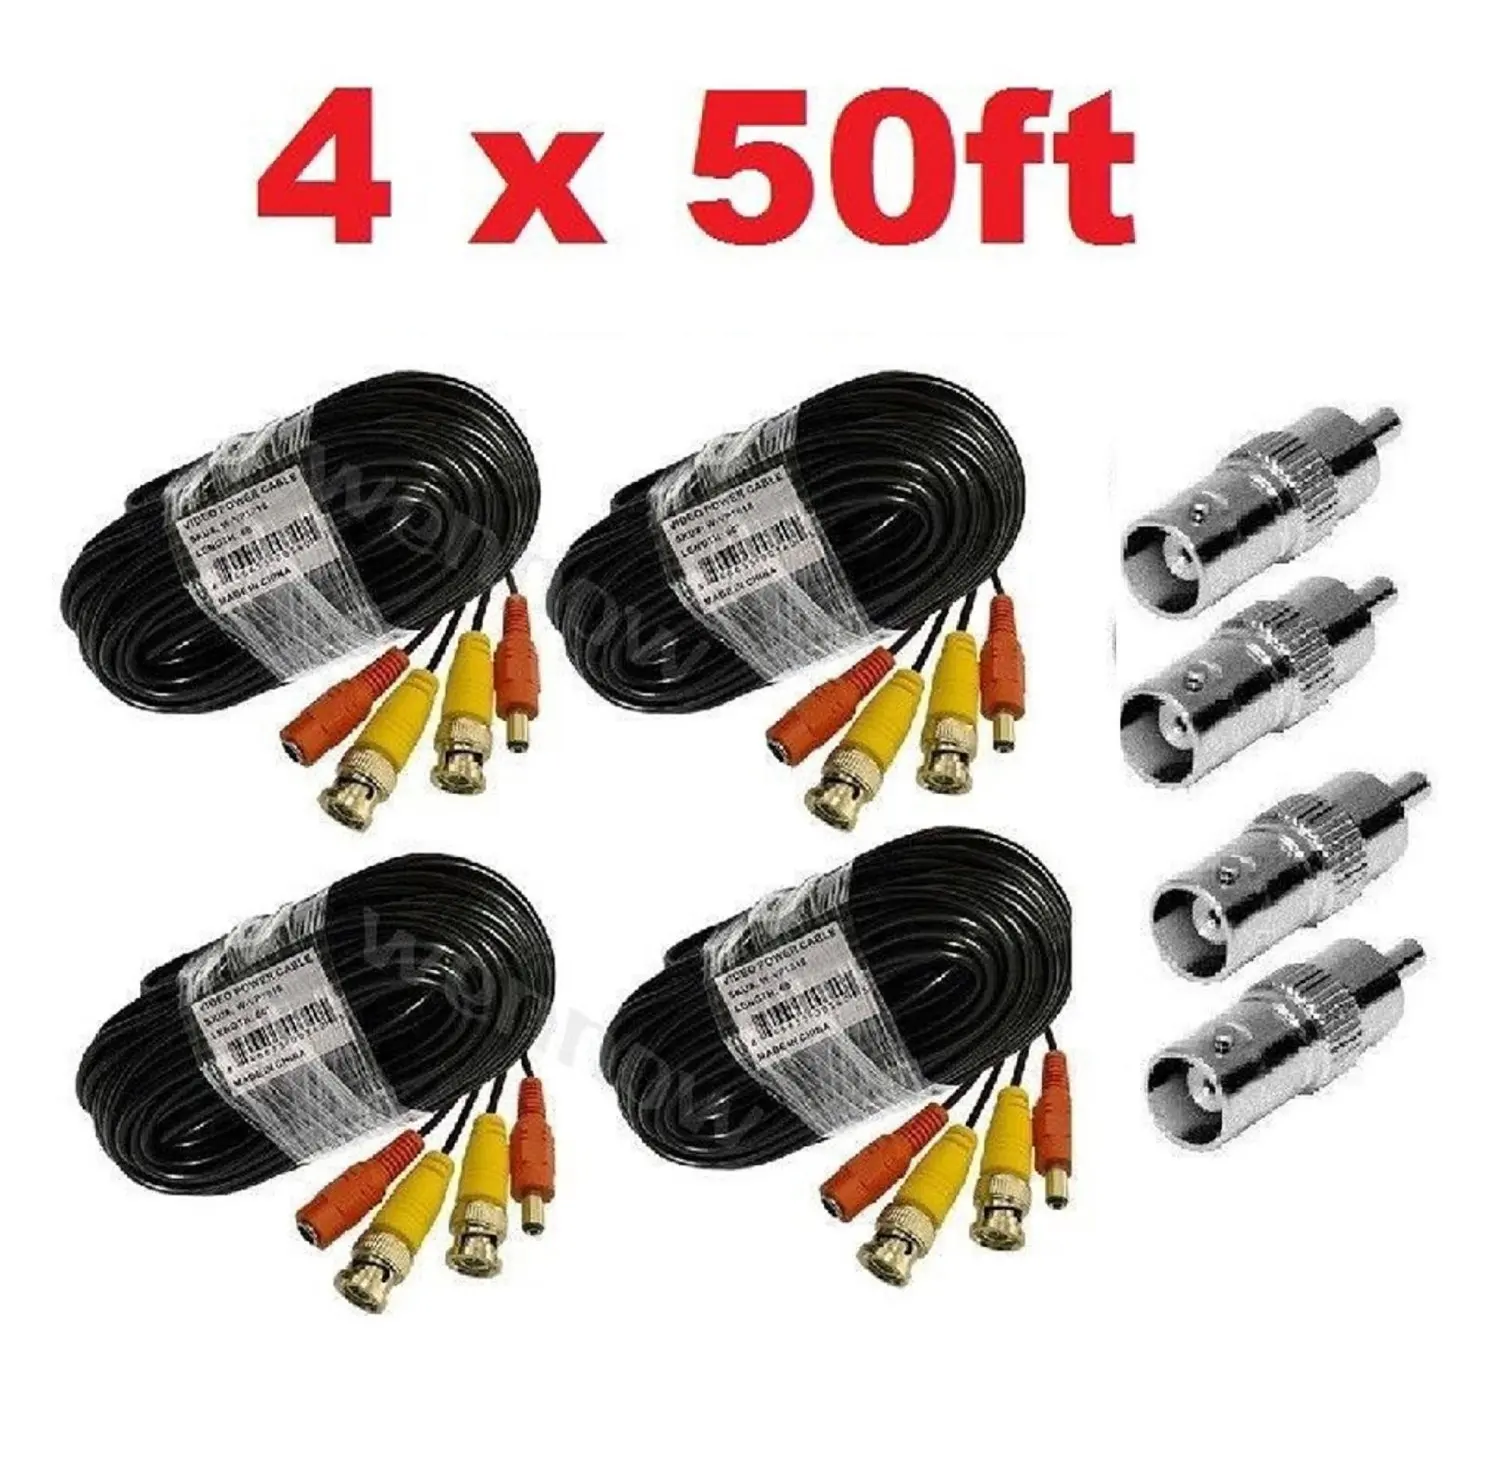 Premium Quality 4x50Ft Video and Power Cable for Lorex  CCTV Security Cameras